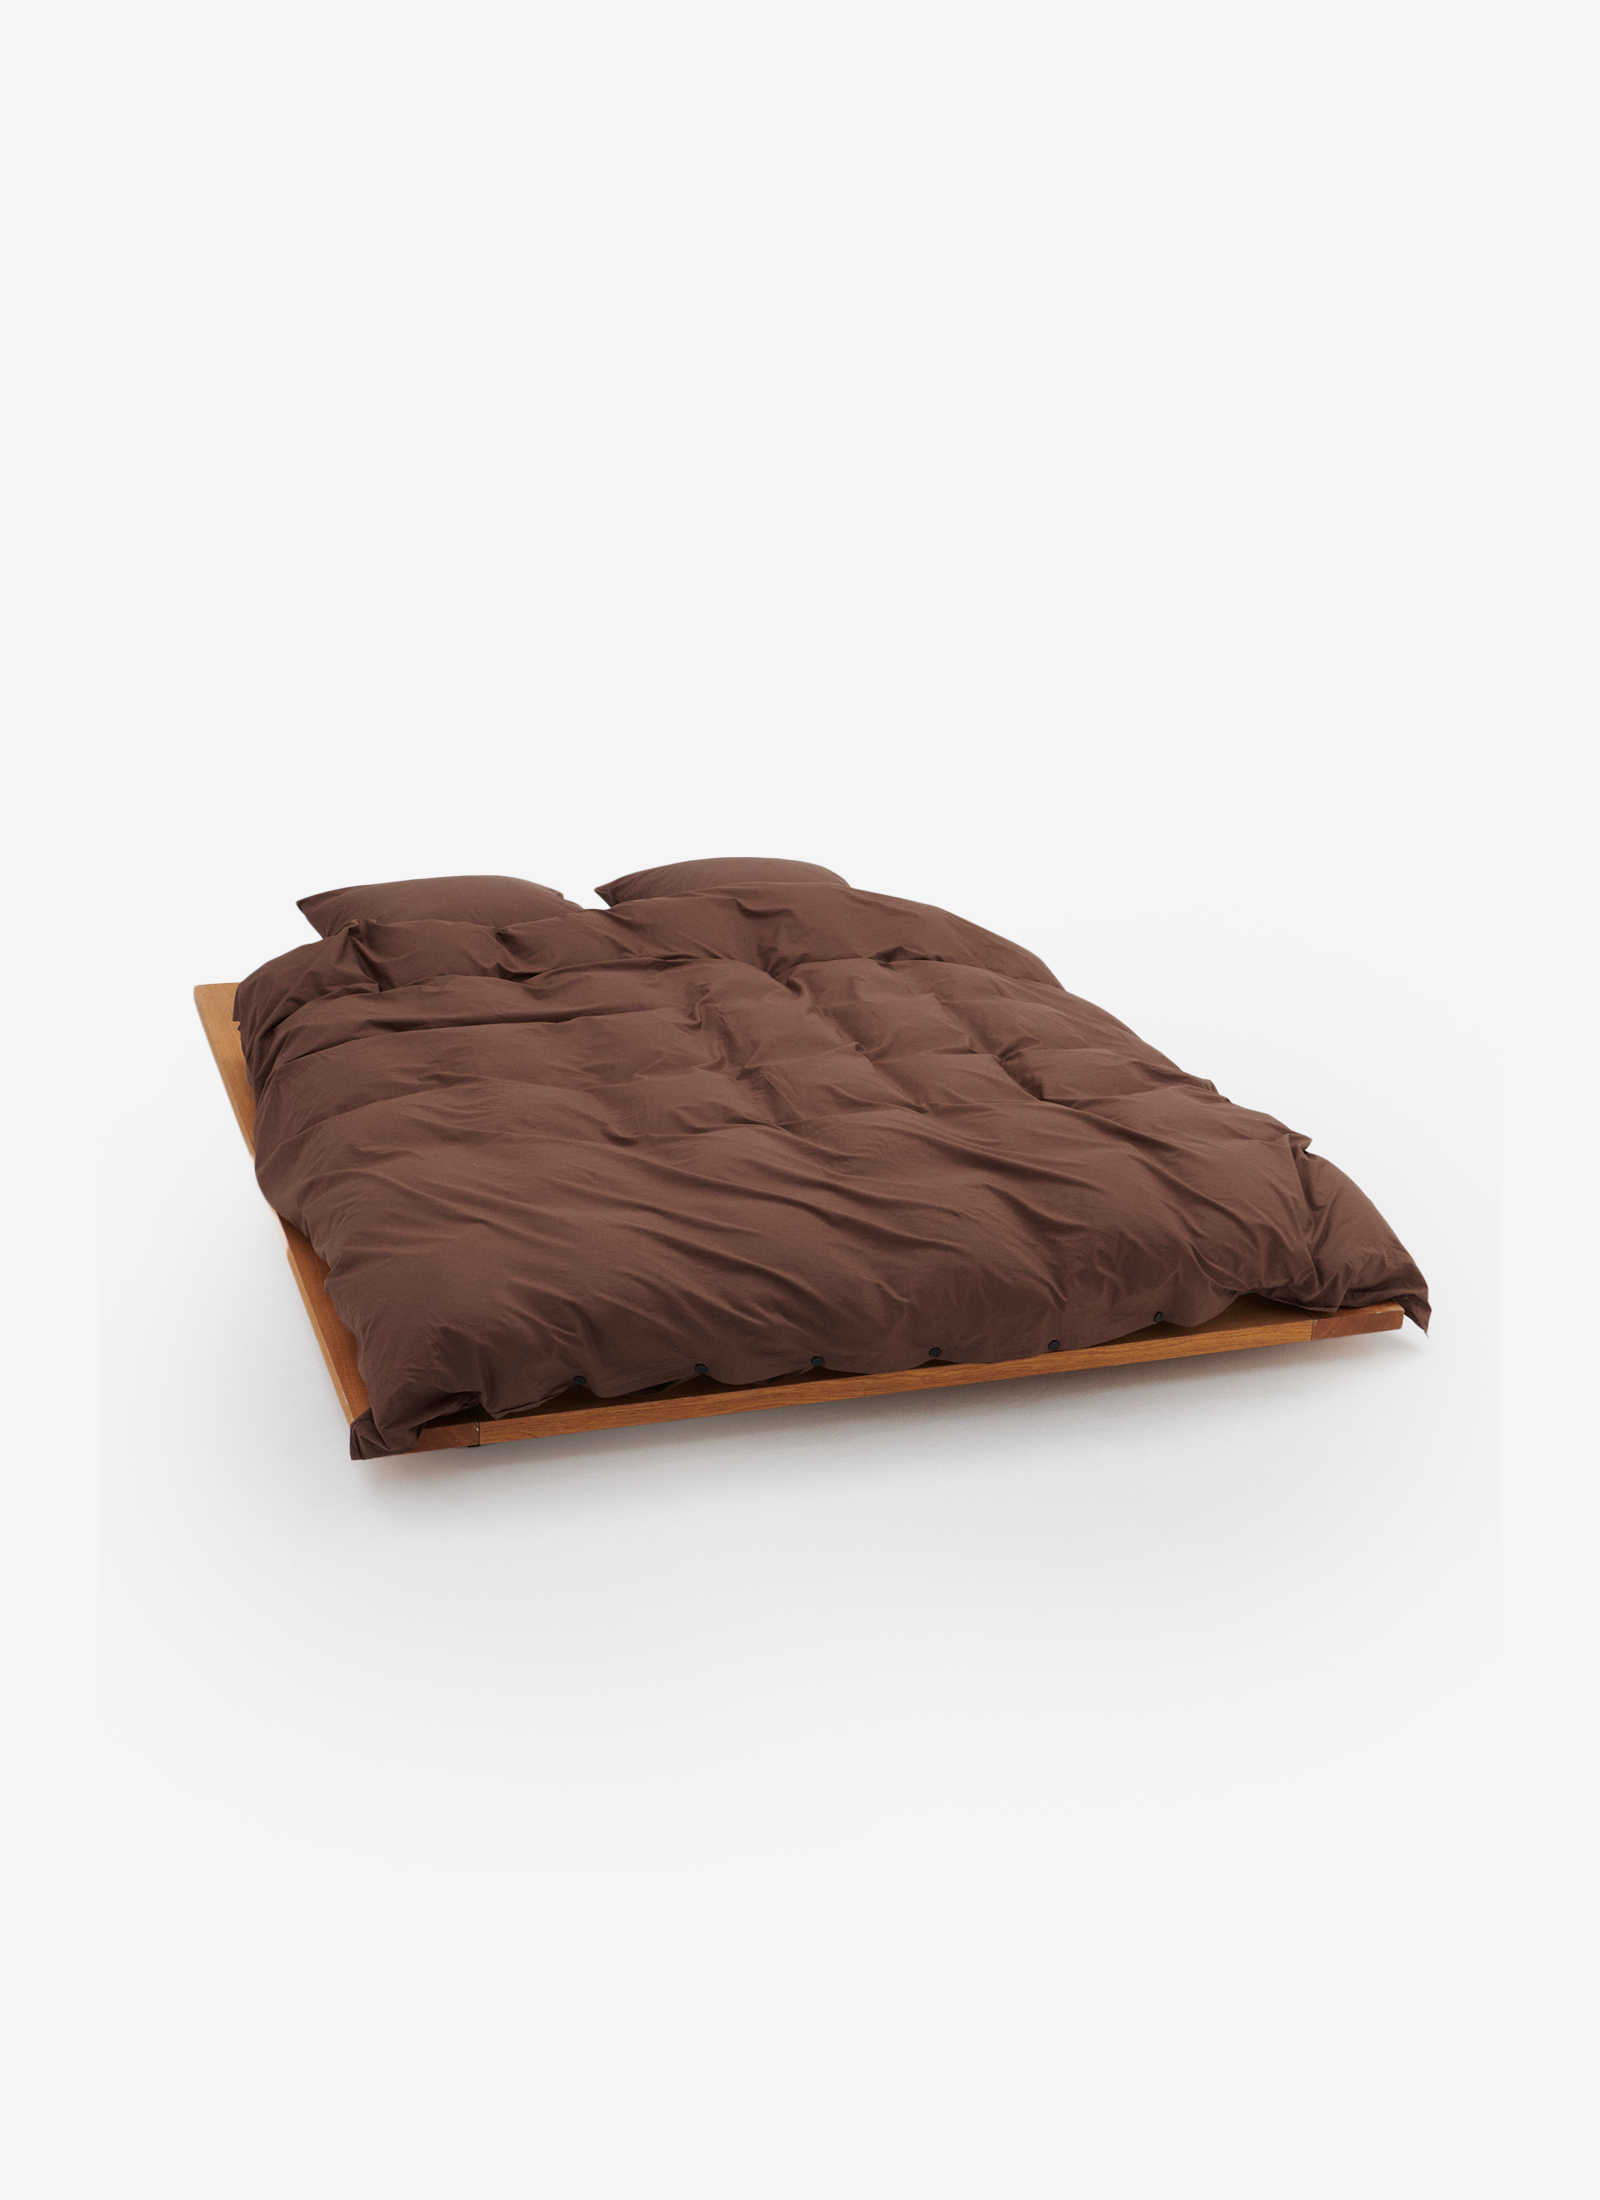 Duvet Cover in Cocoa Brown